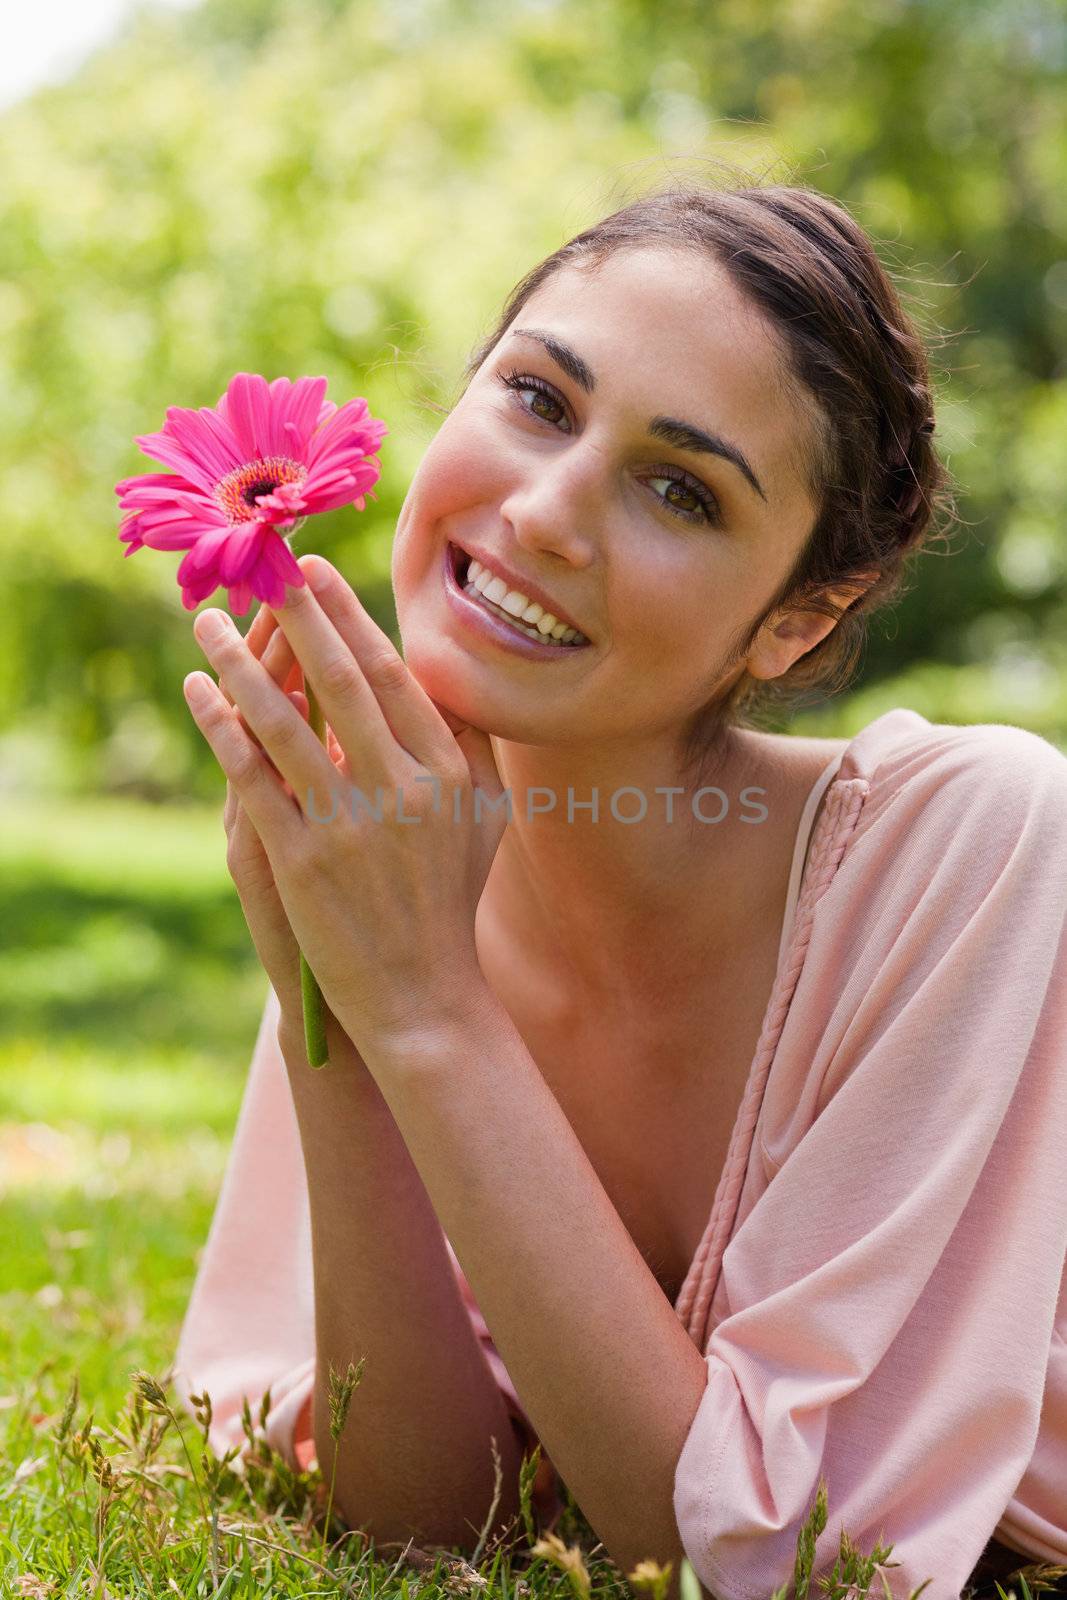 Smiling woman lying on her front and resting her chin on her arms while holding a pink flower